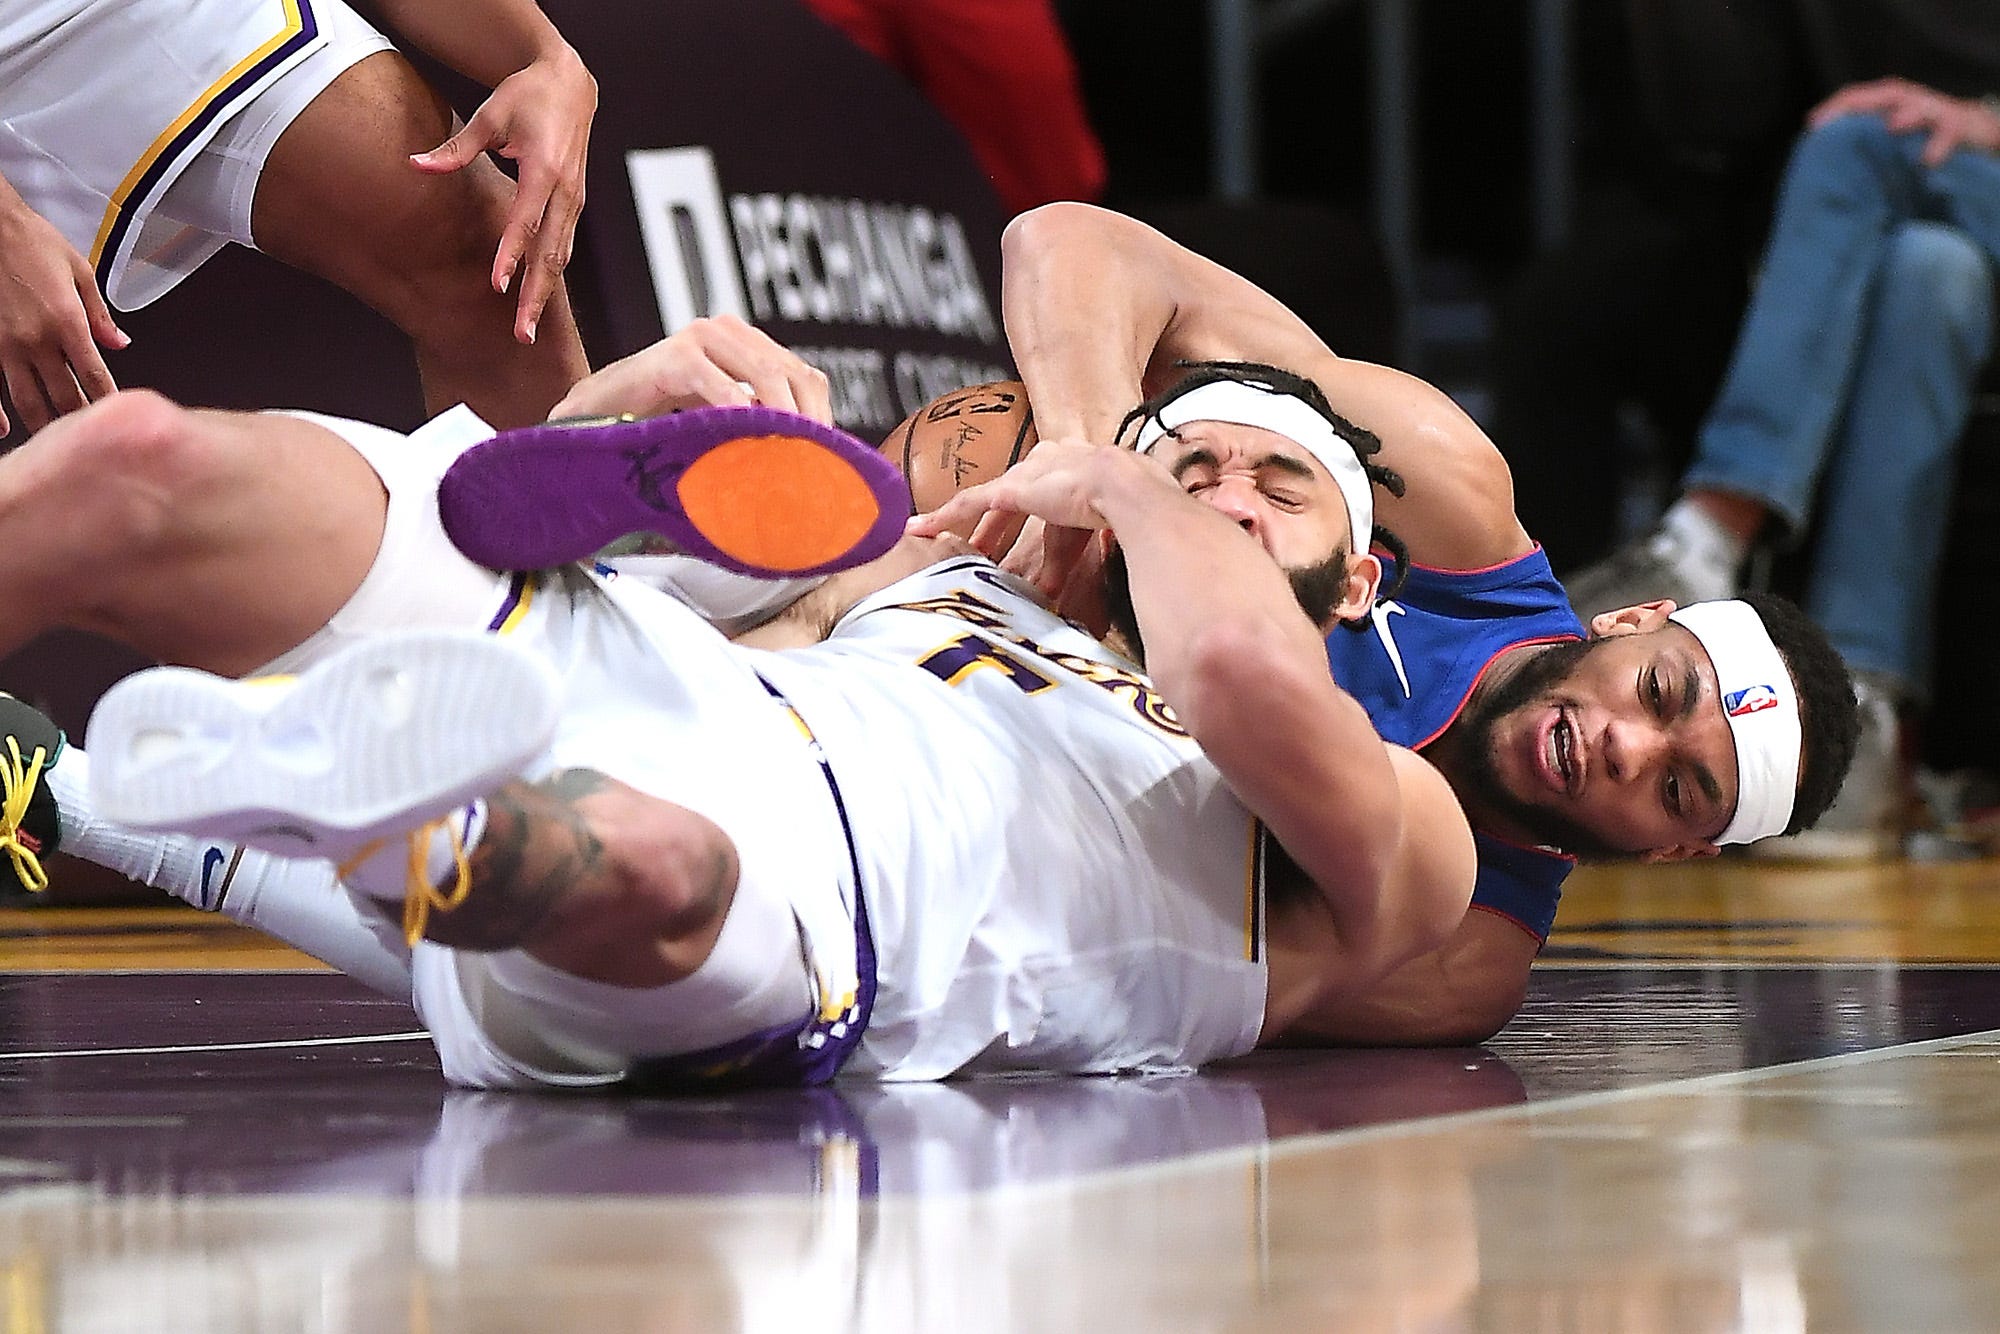 Los Angeles Lakers' JaVale McGee and Detroit Pistons' Bruce Brown battle for a loose ball in the second quarter.